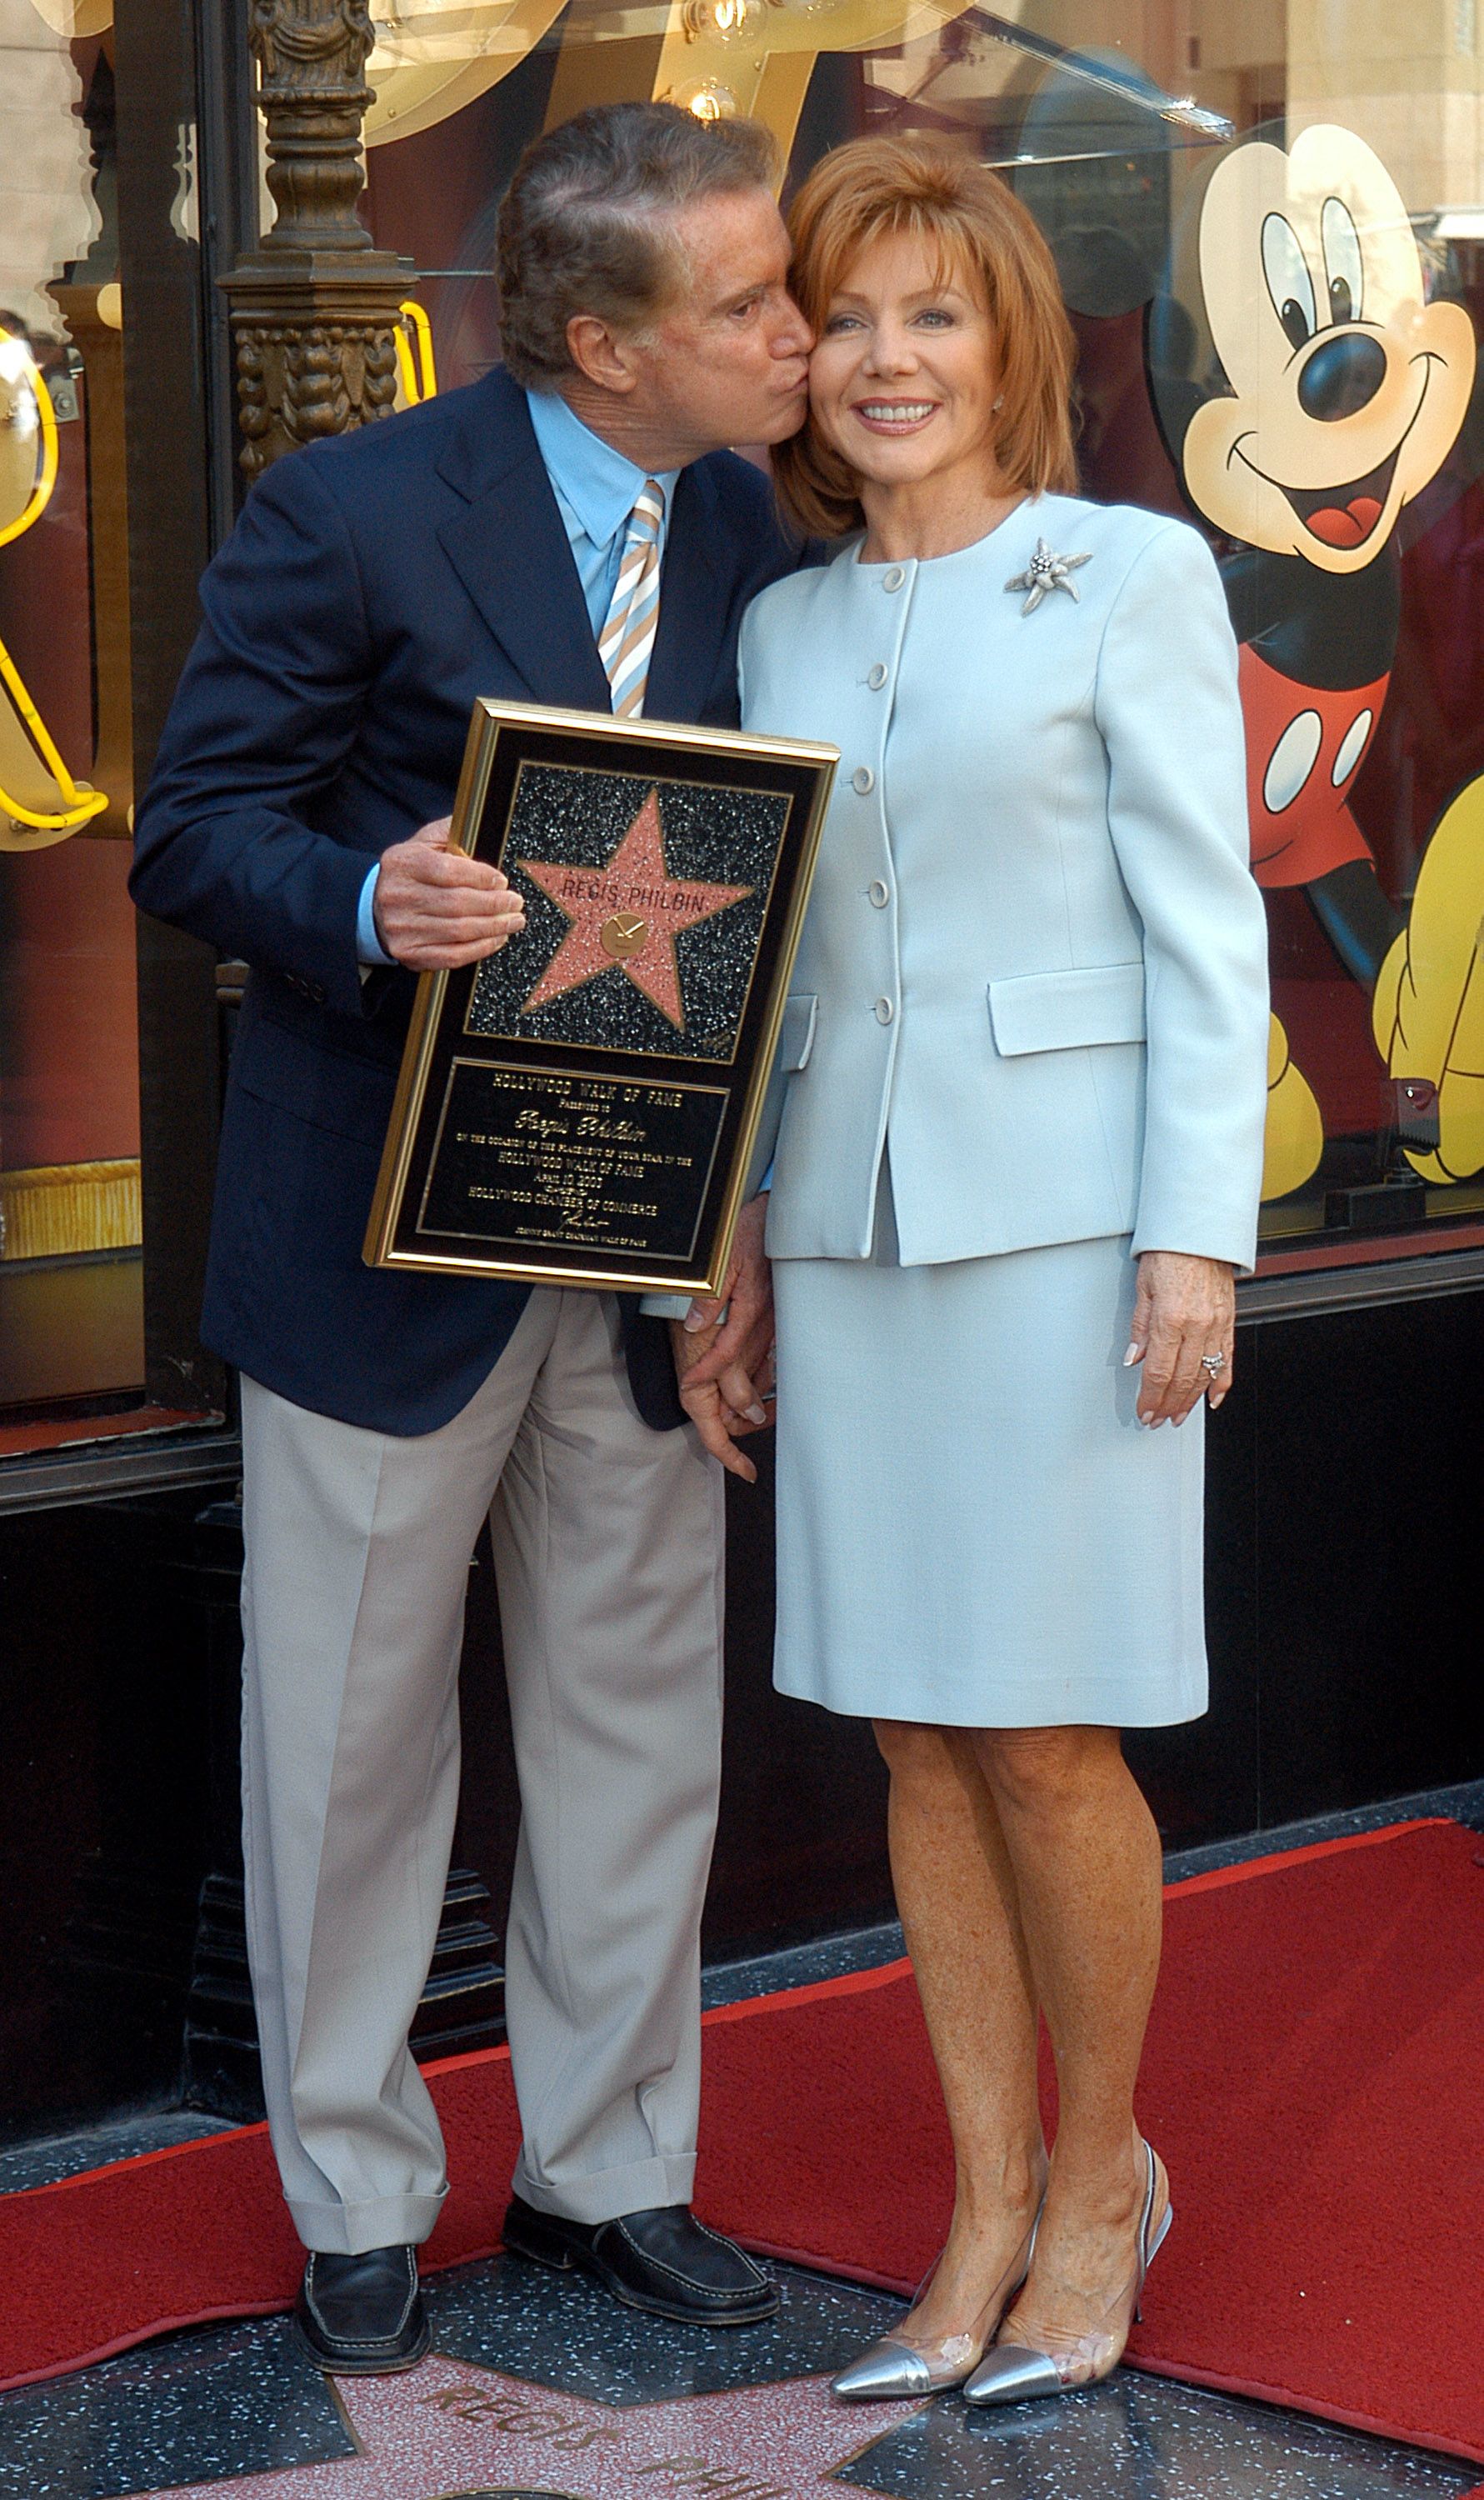 Regis and Joy Philbin during his ceremony being honored with a Star on the Hollywood Walk of Fame in Hollywood, California on April 10, 2003. | Source: Steve Grayson/WireImage/Getty Images